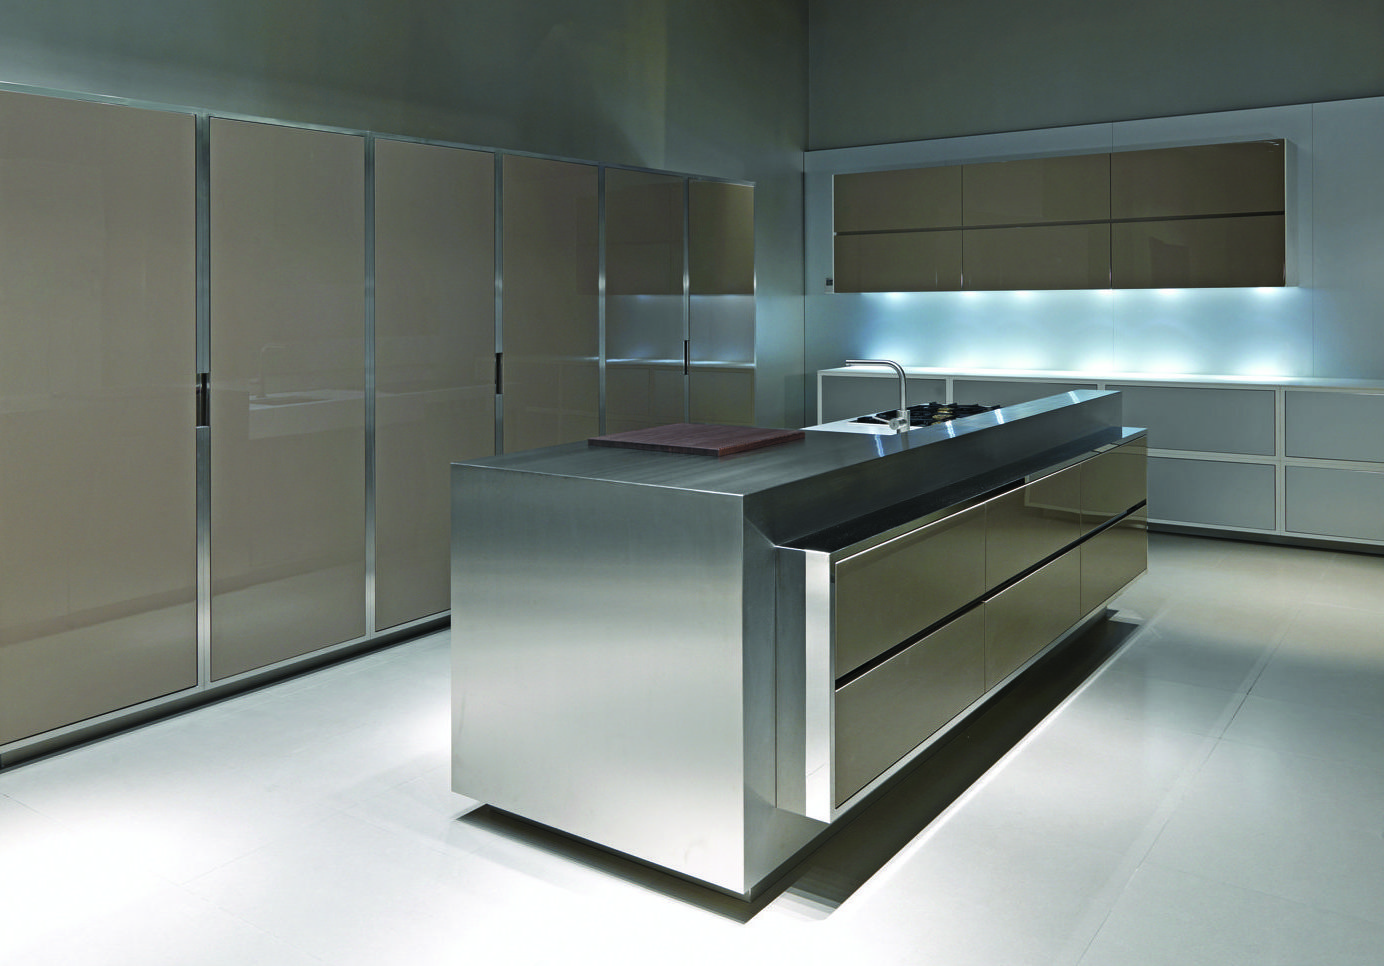 Strato_design_20.10_bespoke-kitchen-project-in-Milano_mat-stainless-steel_high-gloss-lacquer-Tortora-colour_01